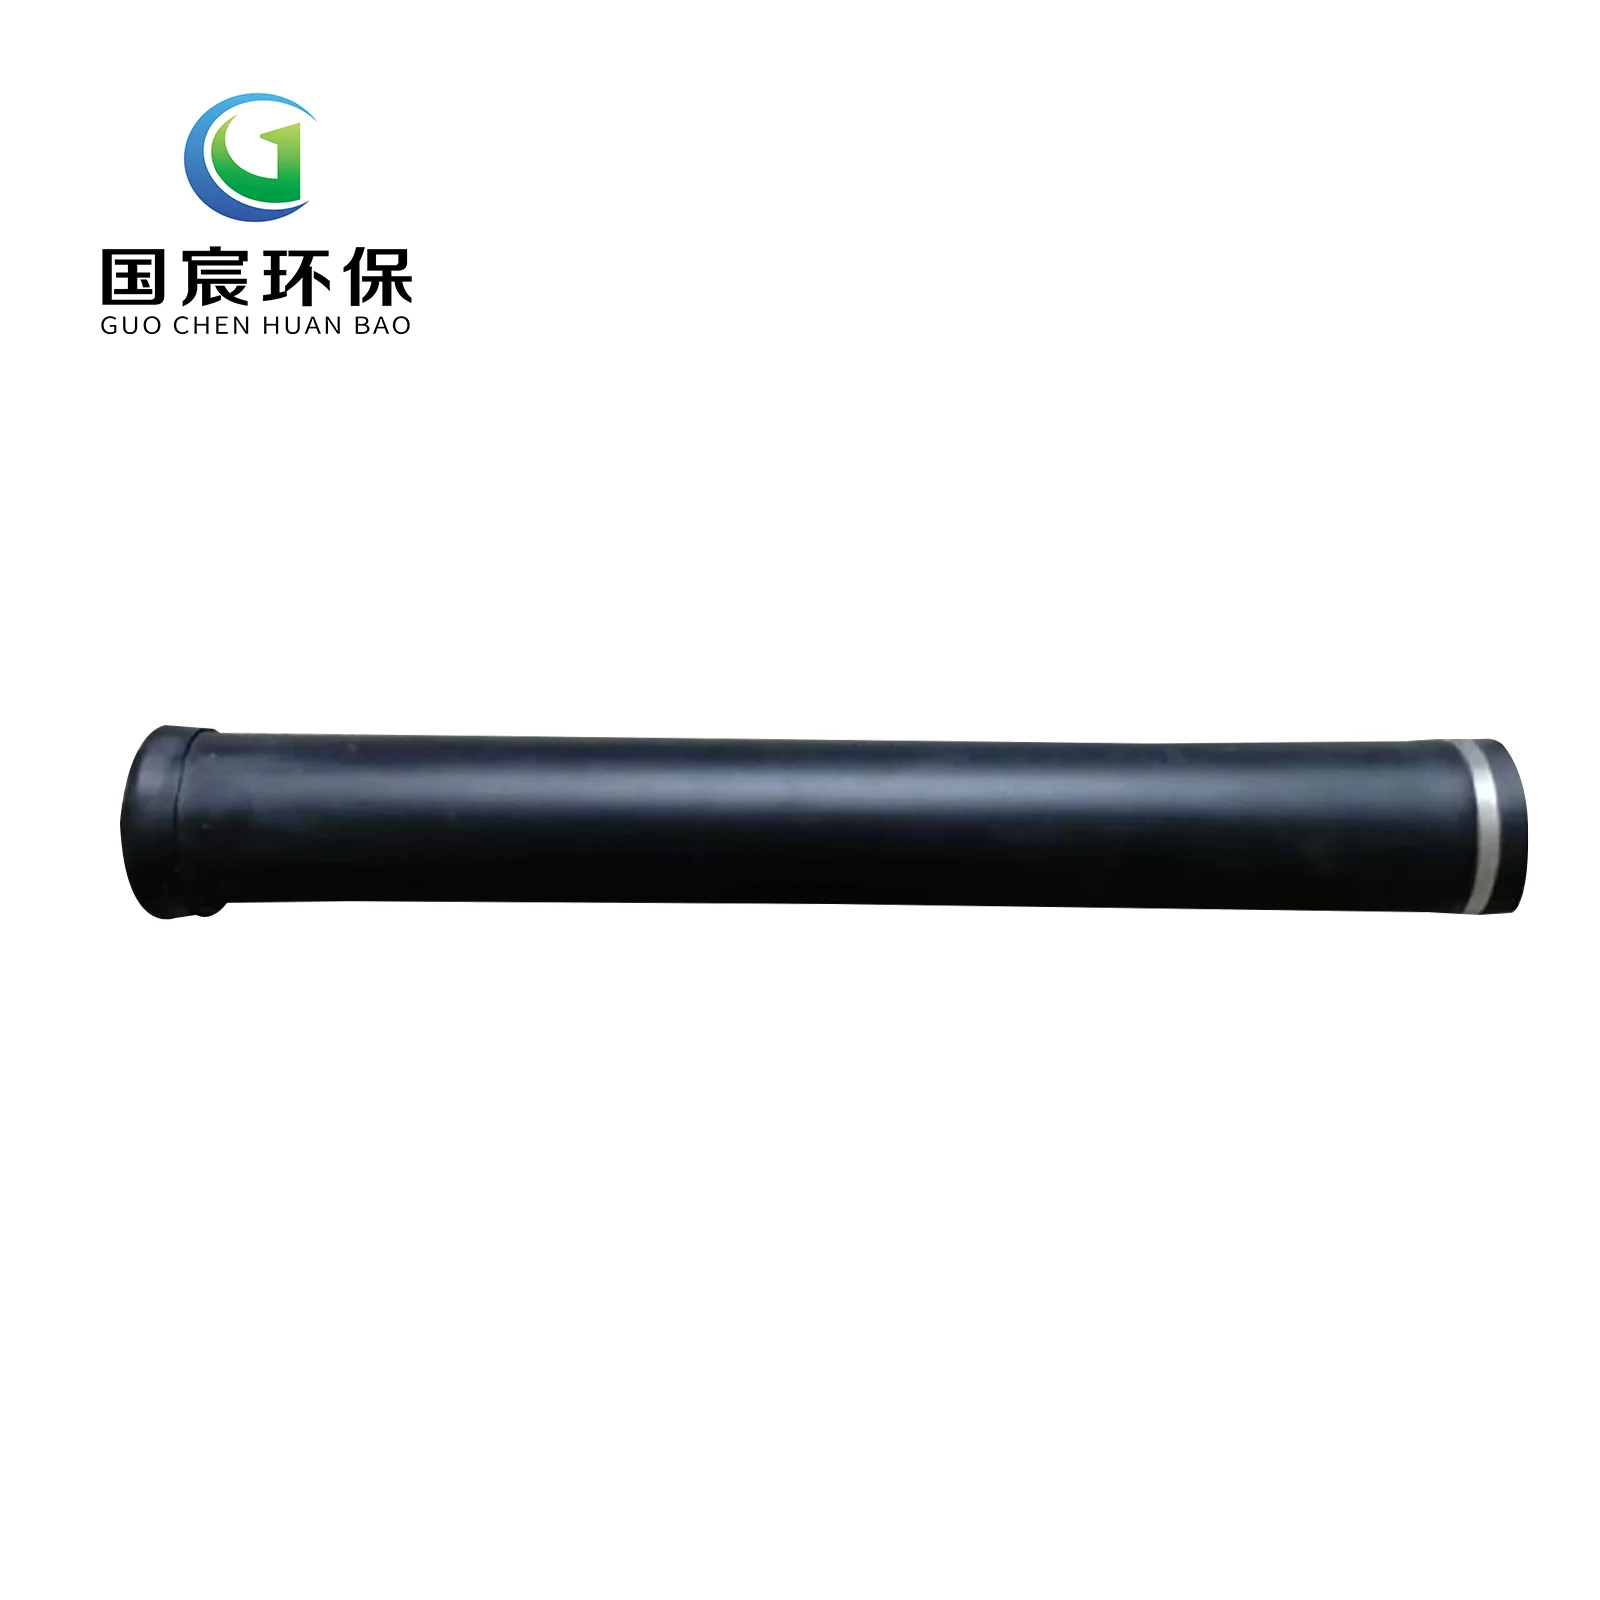 Fine bubble air tubular diffuser aeration bubble air diffuser membrane fine bubble diffuser tube for water treatment